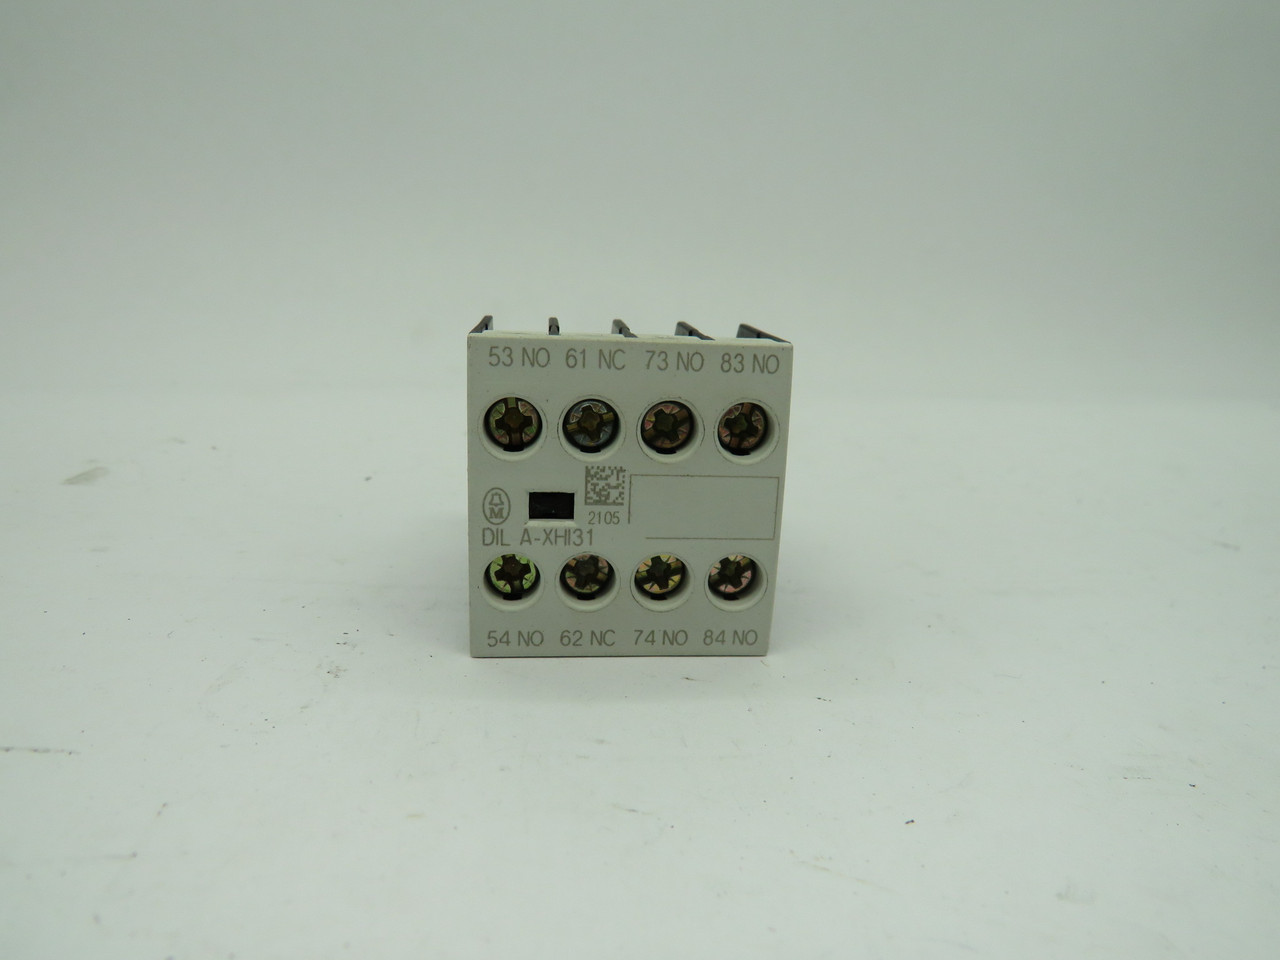 Moeller DILA-XHI31 Auxiliary Contact Block 600VAC 10A 3NO 1NC USED